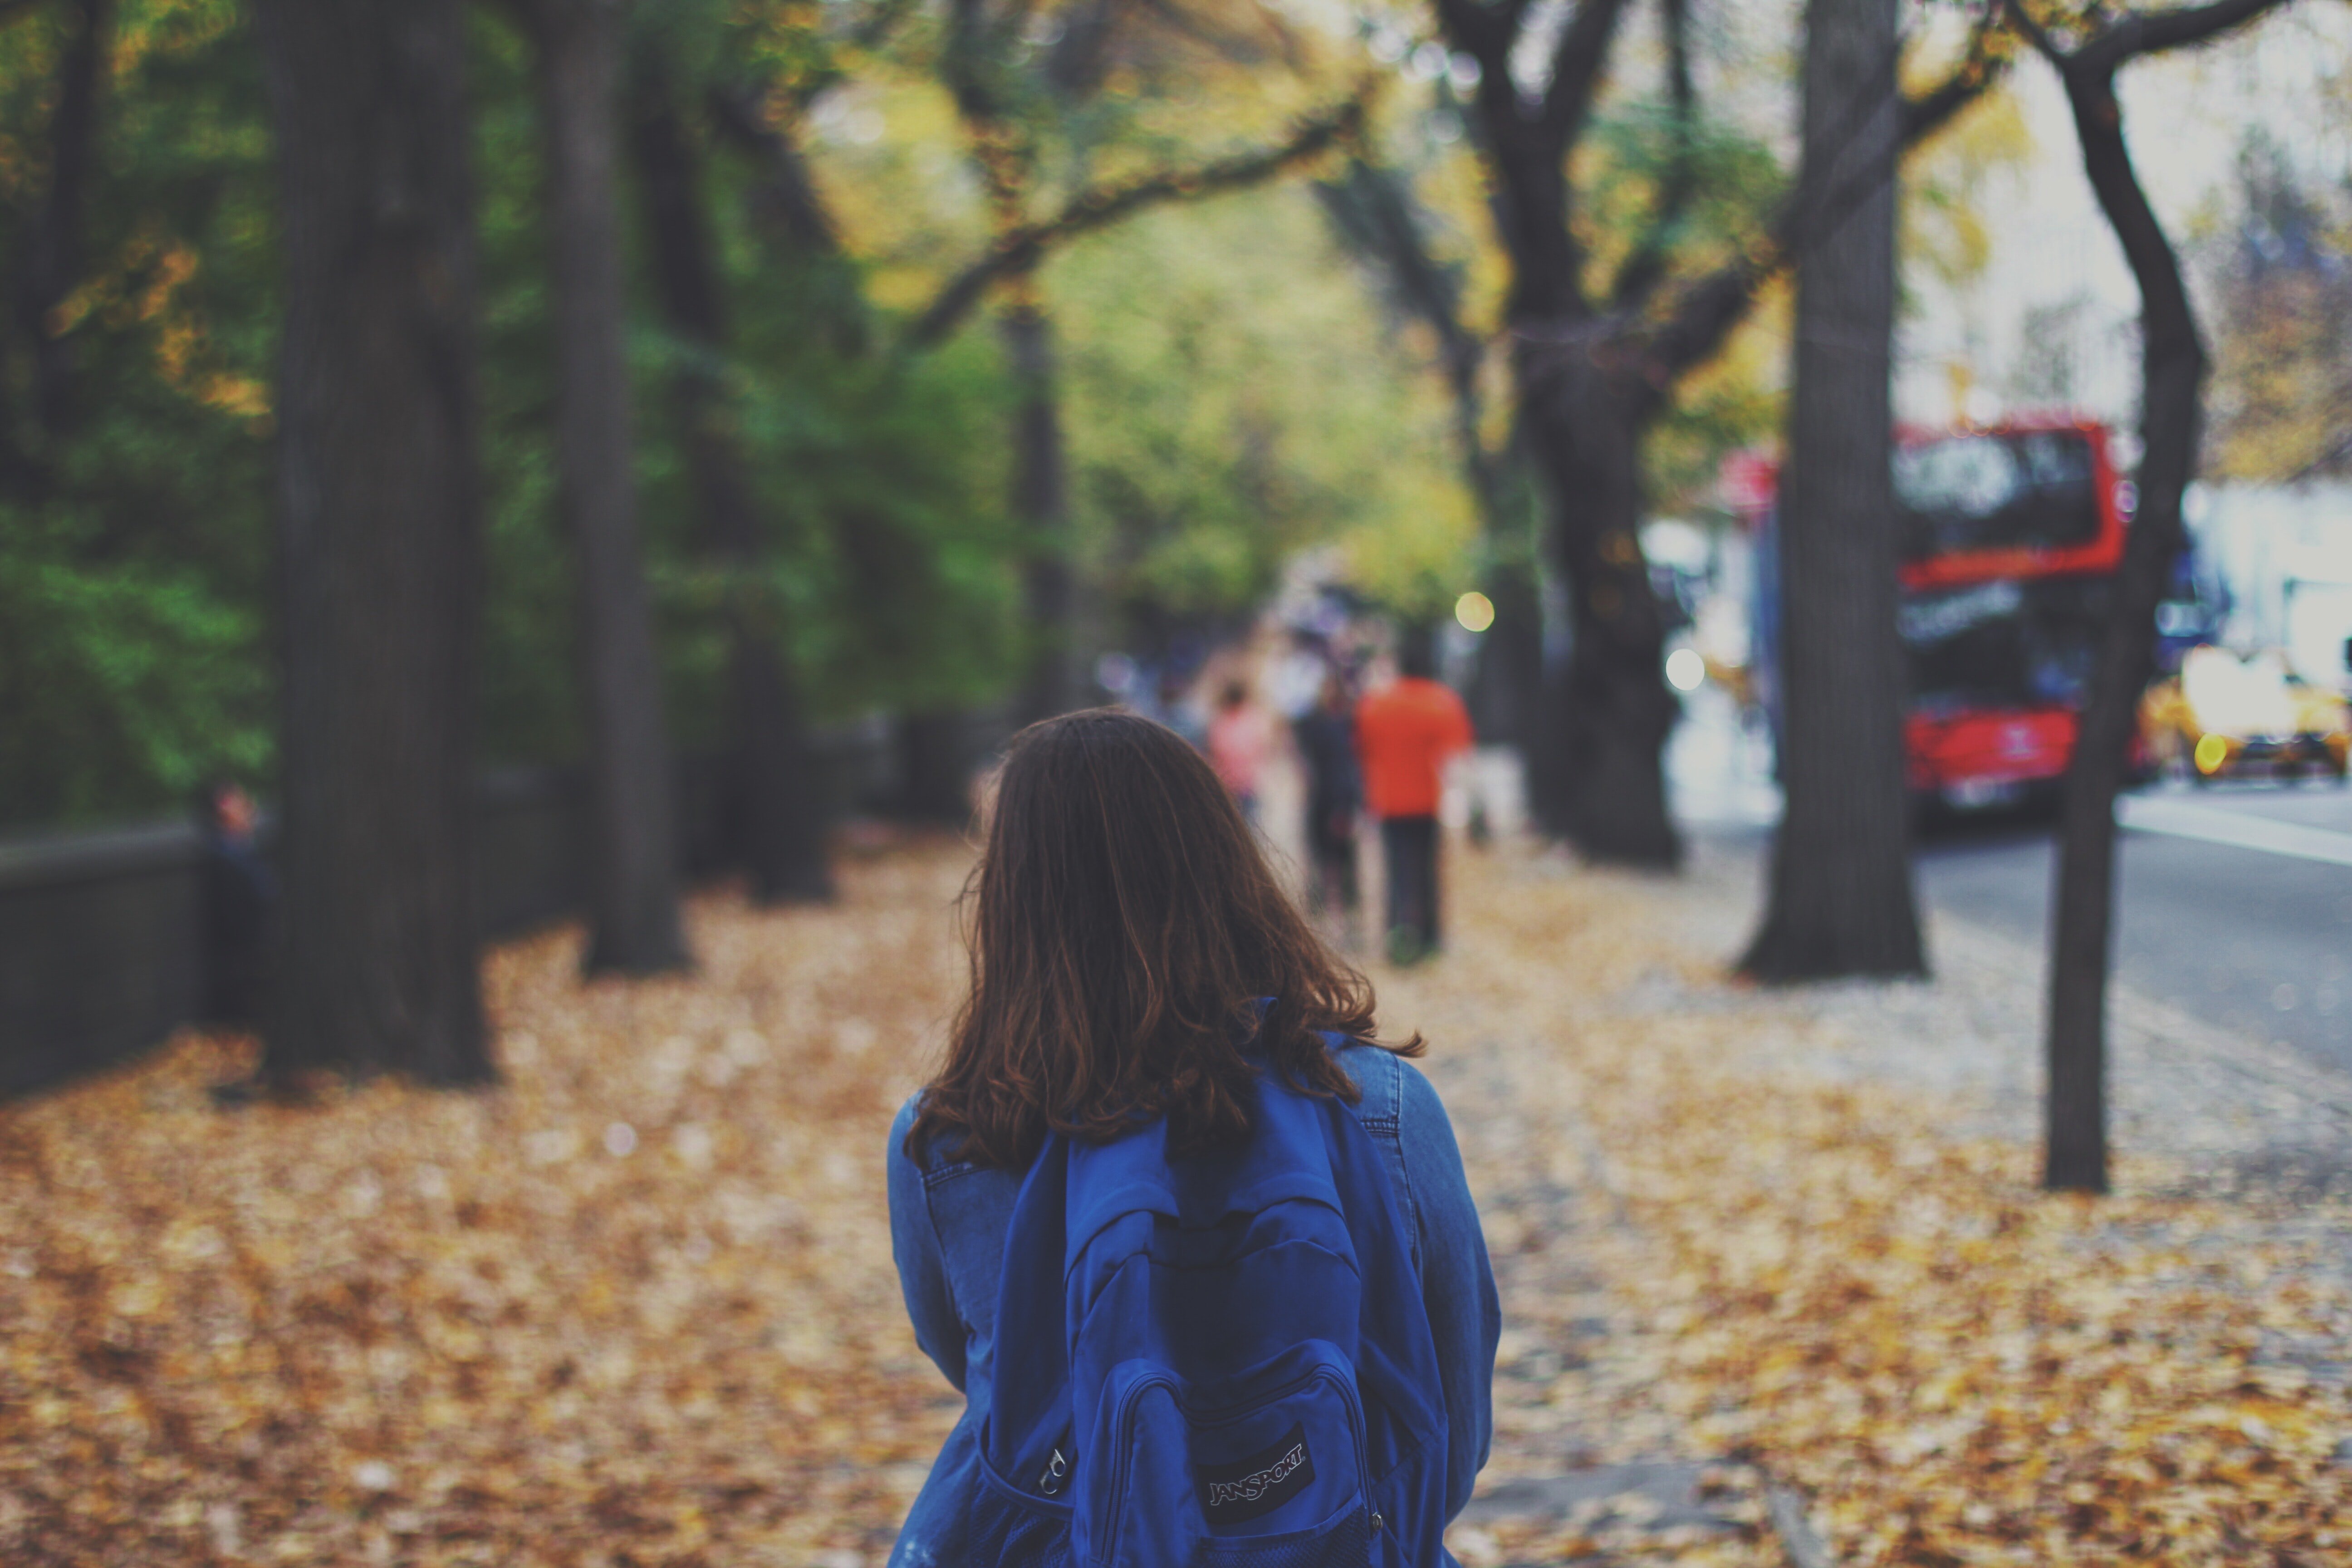 Vanessa insisted on going alone to school. | Source: Unsplash